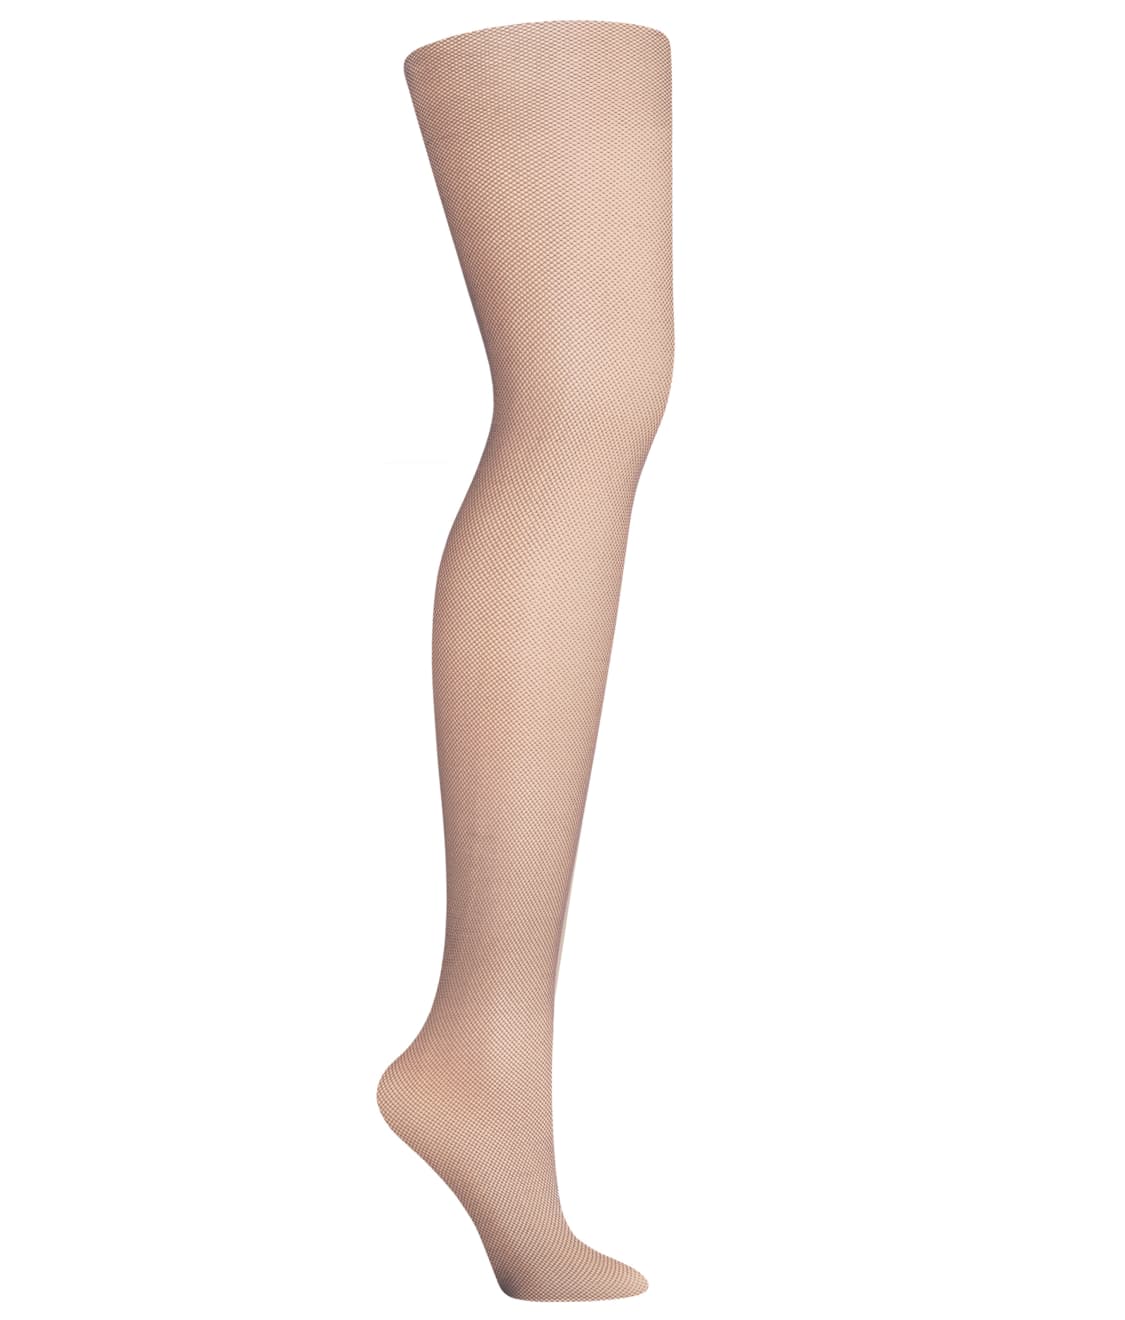 Hanes Plus Size Curves Fishnet Tights & Reviews